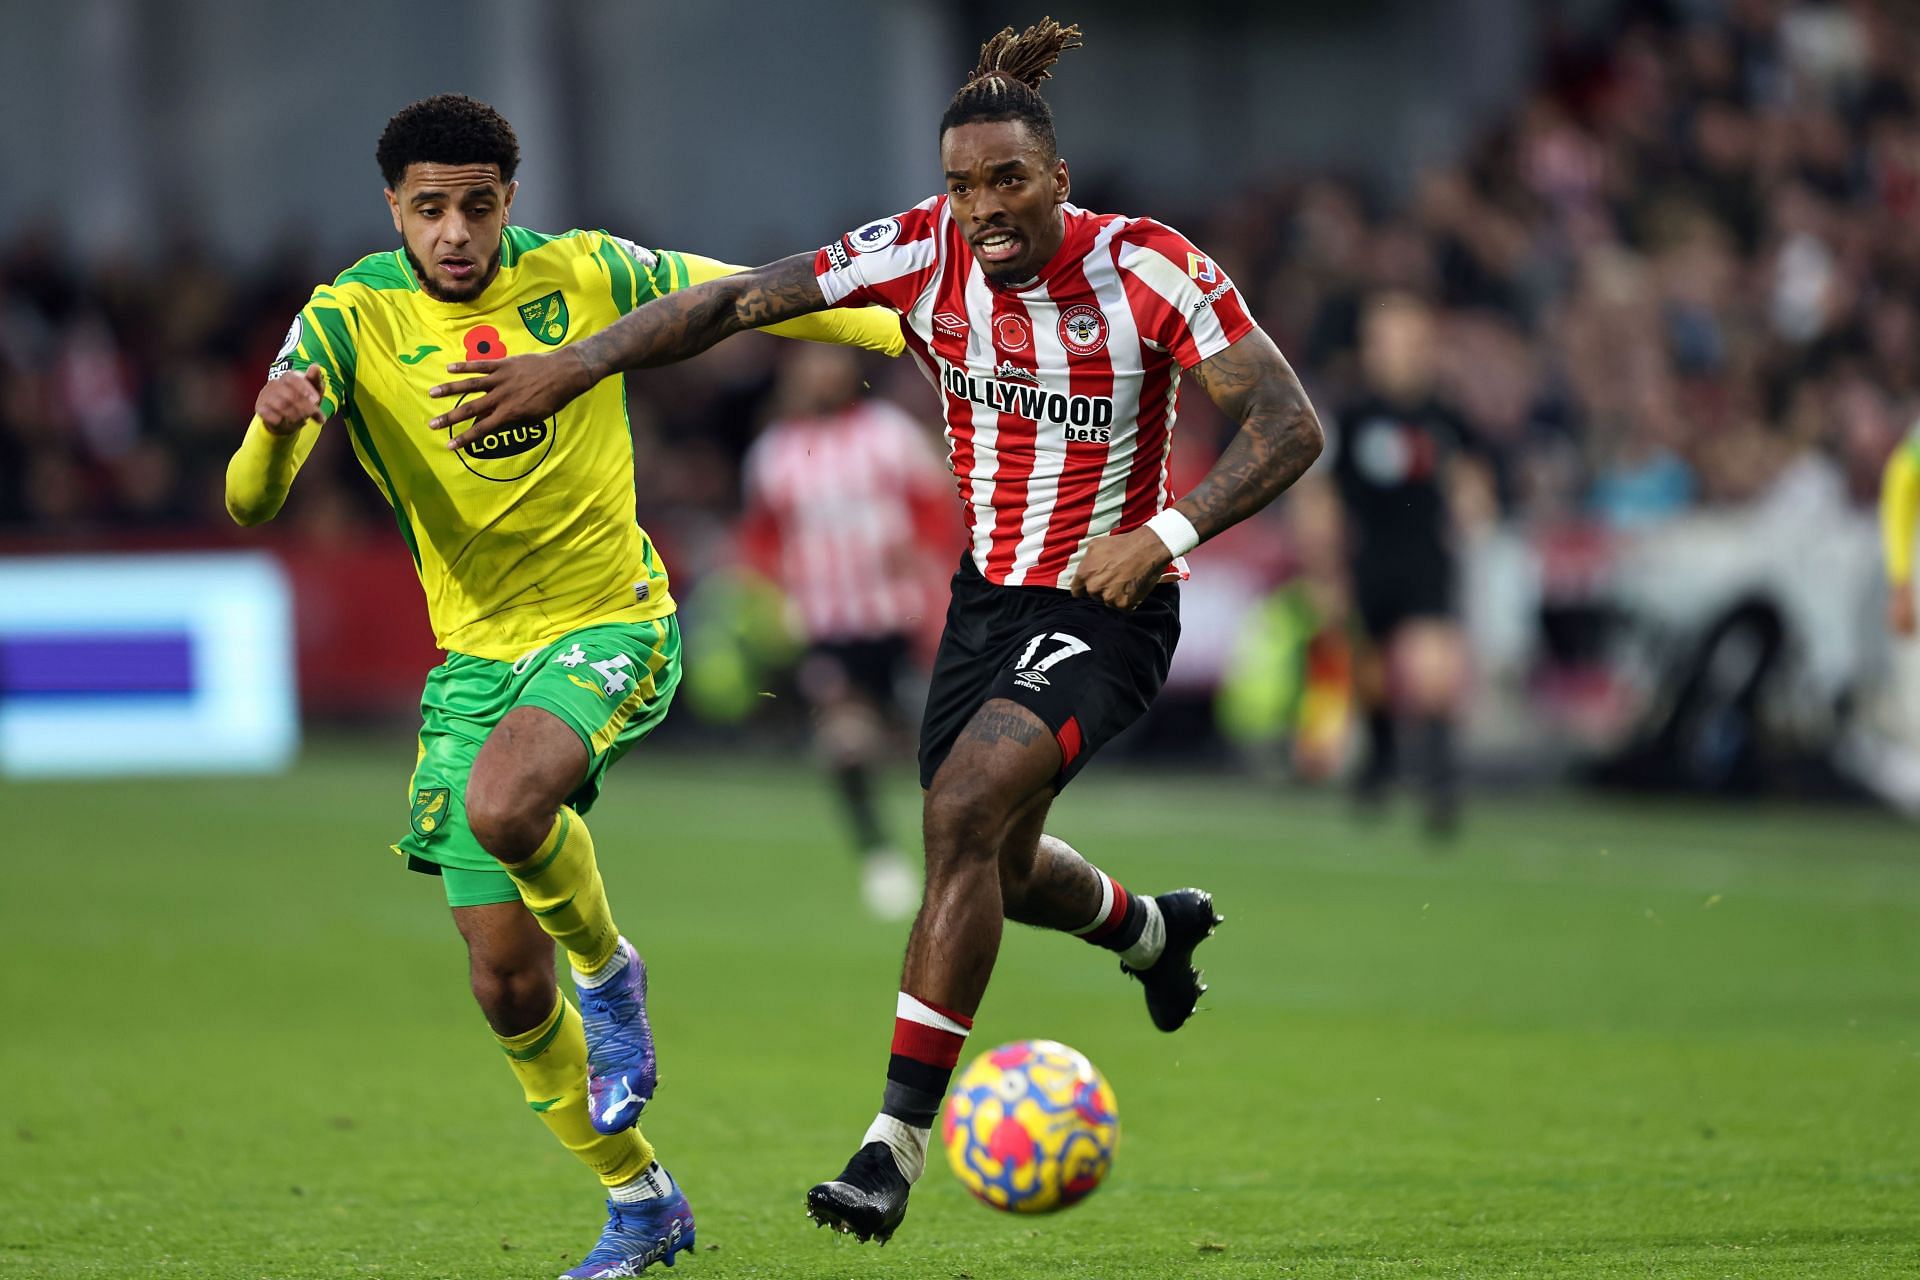 Norwich City play host to Brentford on Saturday